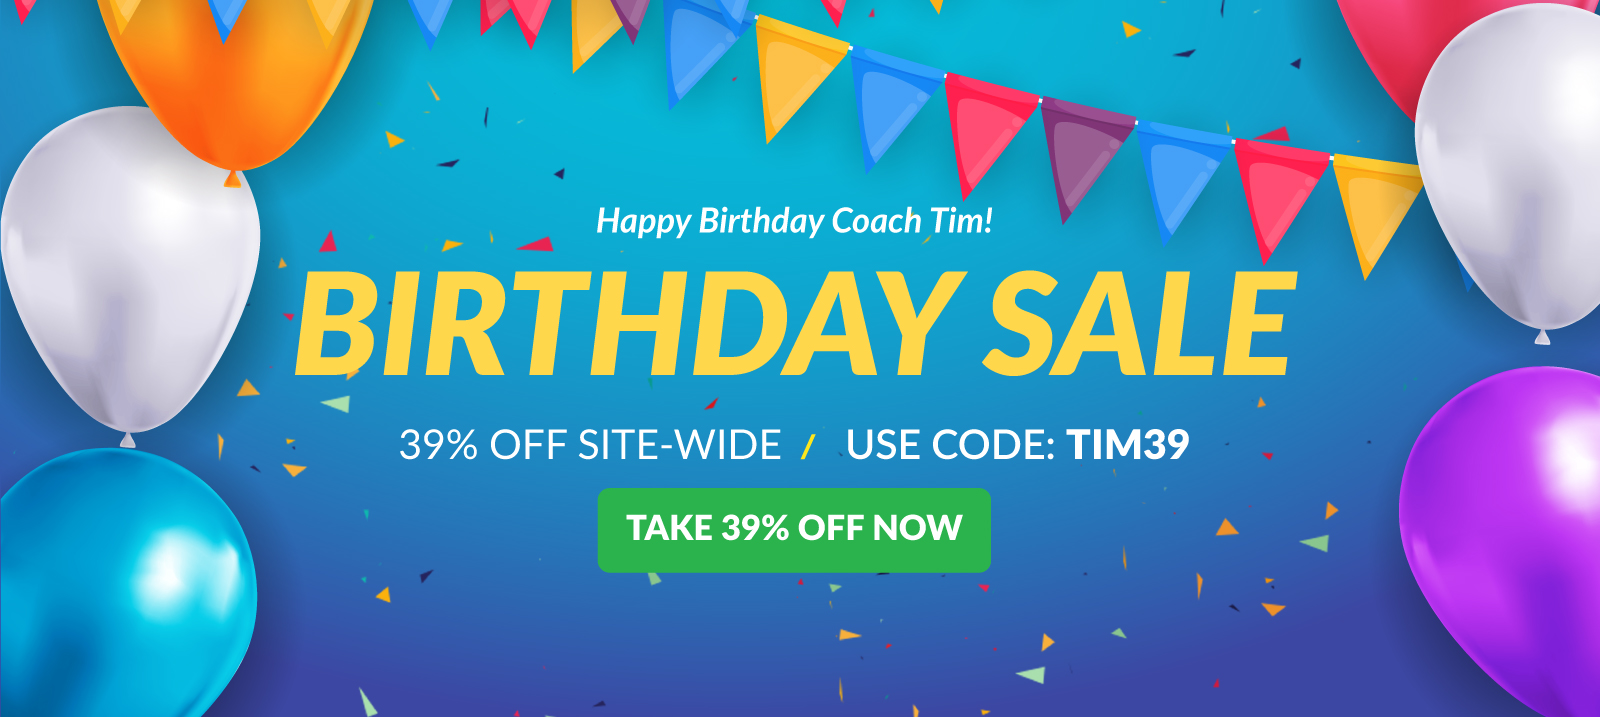 LIMITED TIME: Save 39% sitewide with code TIM39 - no limits or minimums!